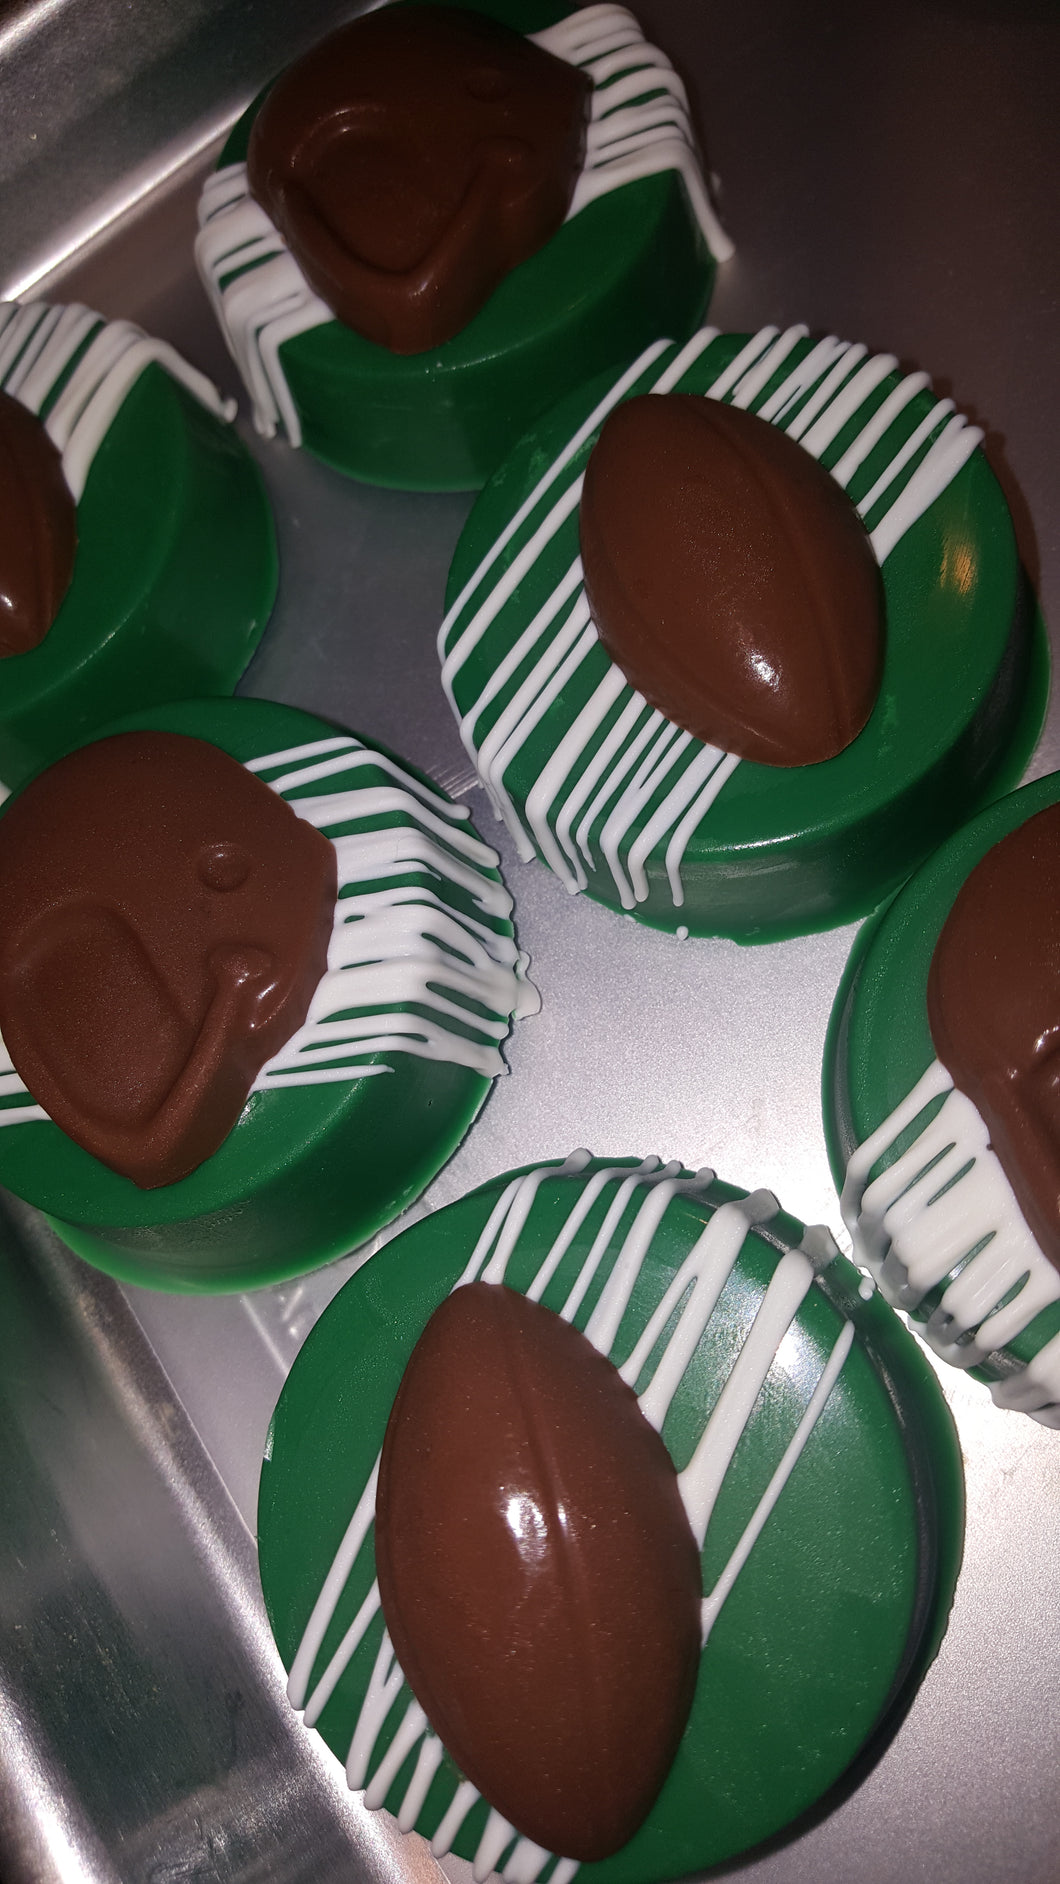 Oreo Cookies - Chocolate Covered/Dipped (Football)